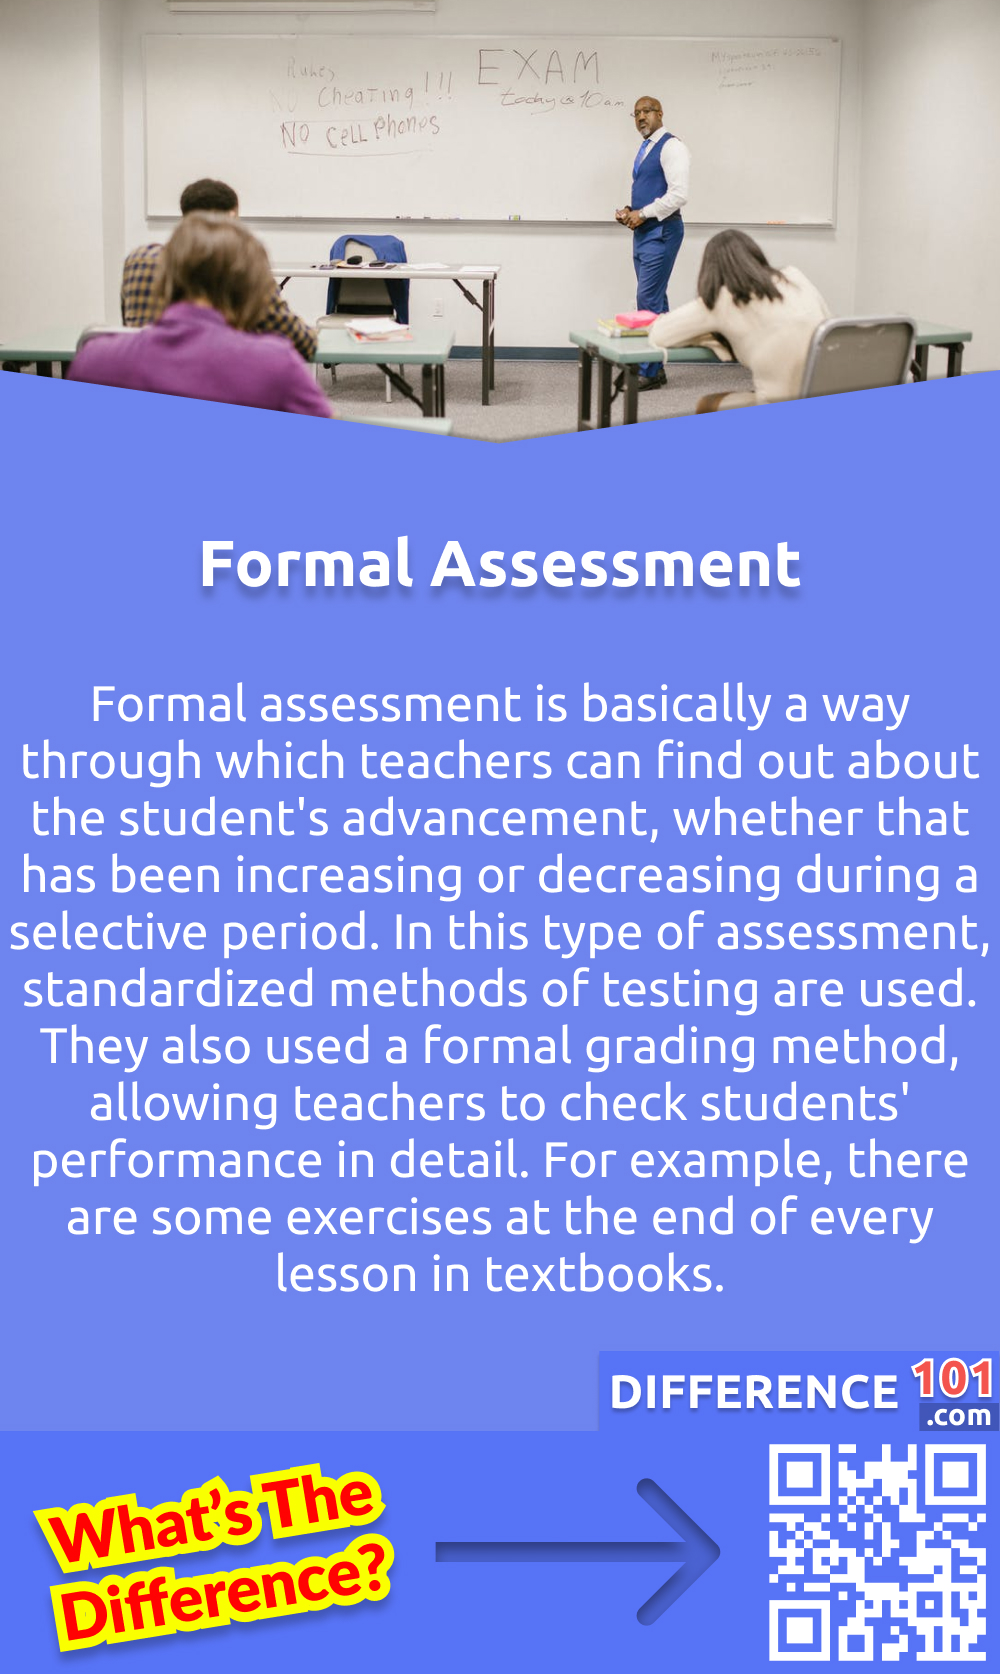 What Is Formal Assessment? Formal assessment is basically a way through which teachers can find out about the student's advancement, whether that has been increasing or decreasing during a selective period. In this type of assessment, standardized methods of testing are used. They also used a formal grading method, allowing teachers to check students' performance in detail. For example, there are some exercises at the end of every lesson in textbooks. The primary purpose of those exercises is to assess whether the student has learned the concept present in the lesson and whether the students can solve all the problems easily.